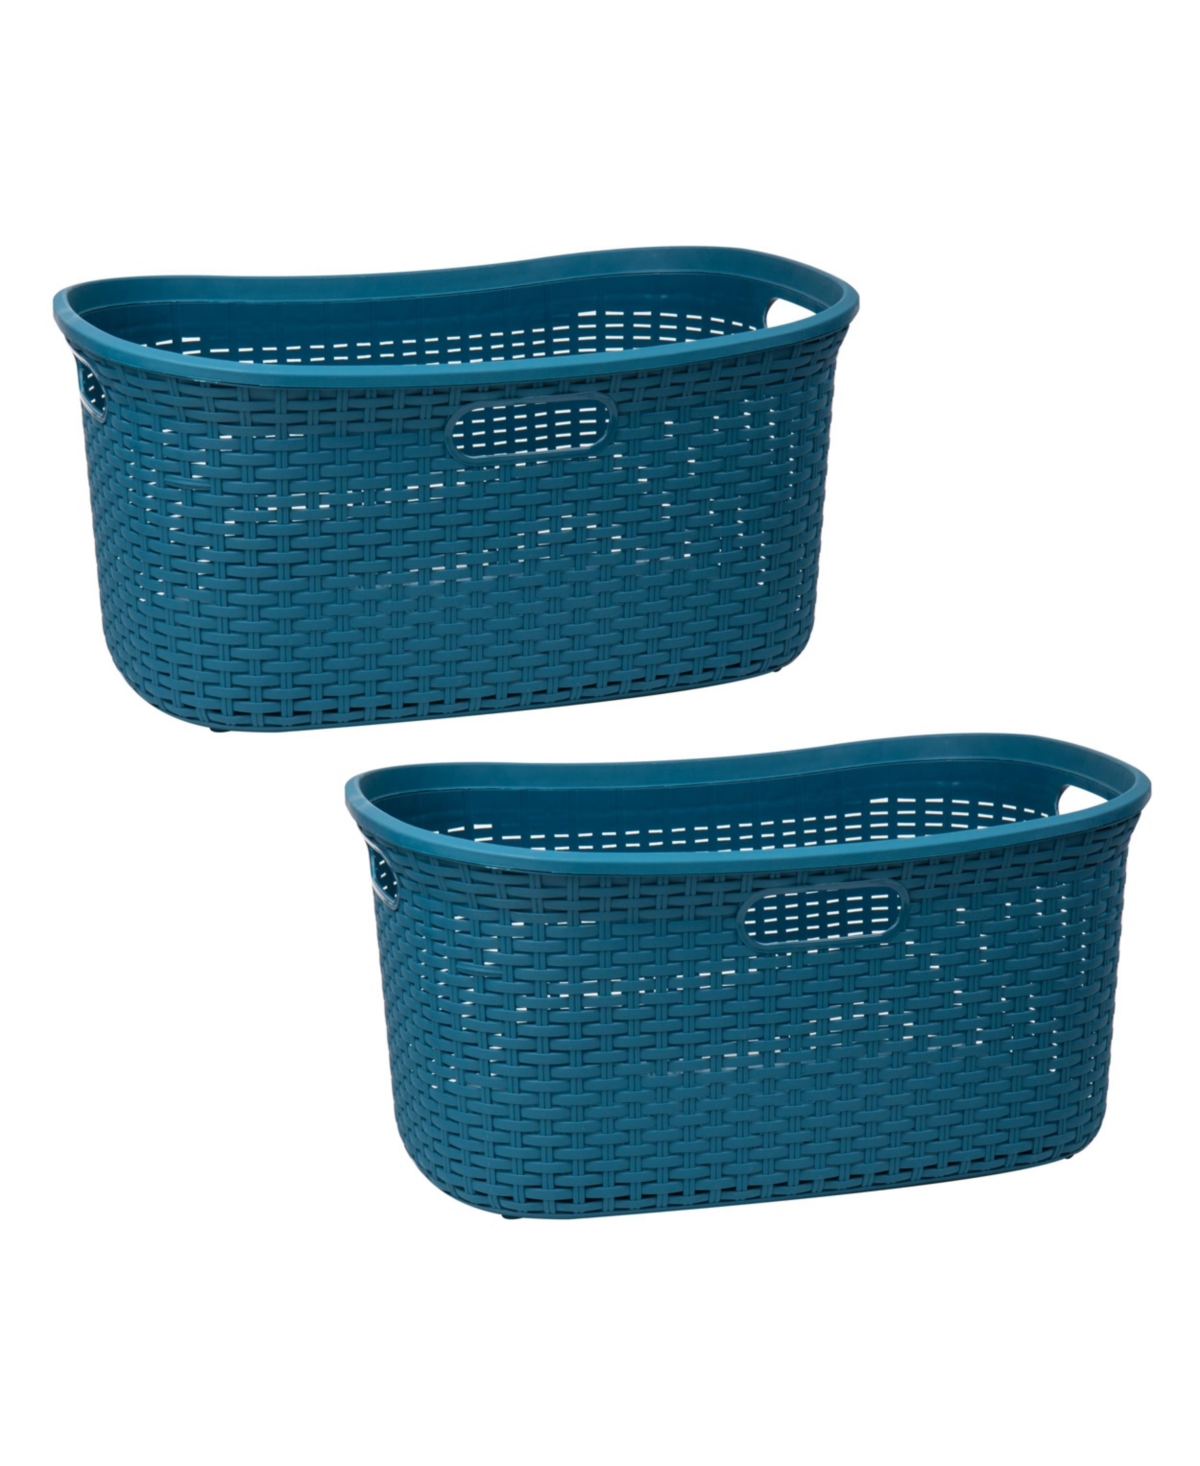 Basket Collection Laundry Basket, Cut Out Handles, Ventilated, Set of 2 - Blue